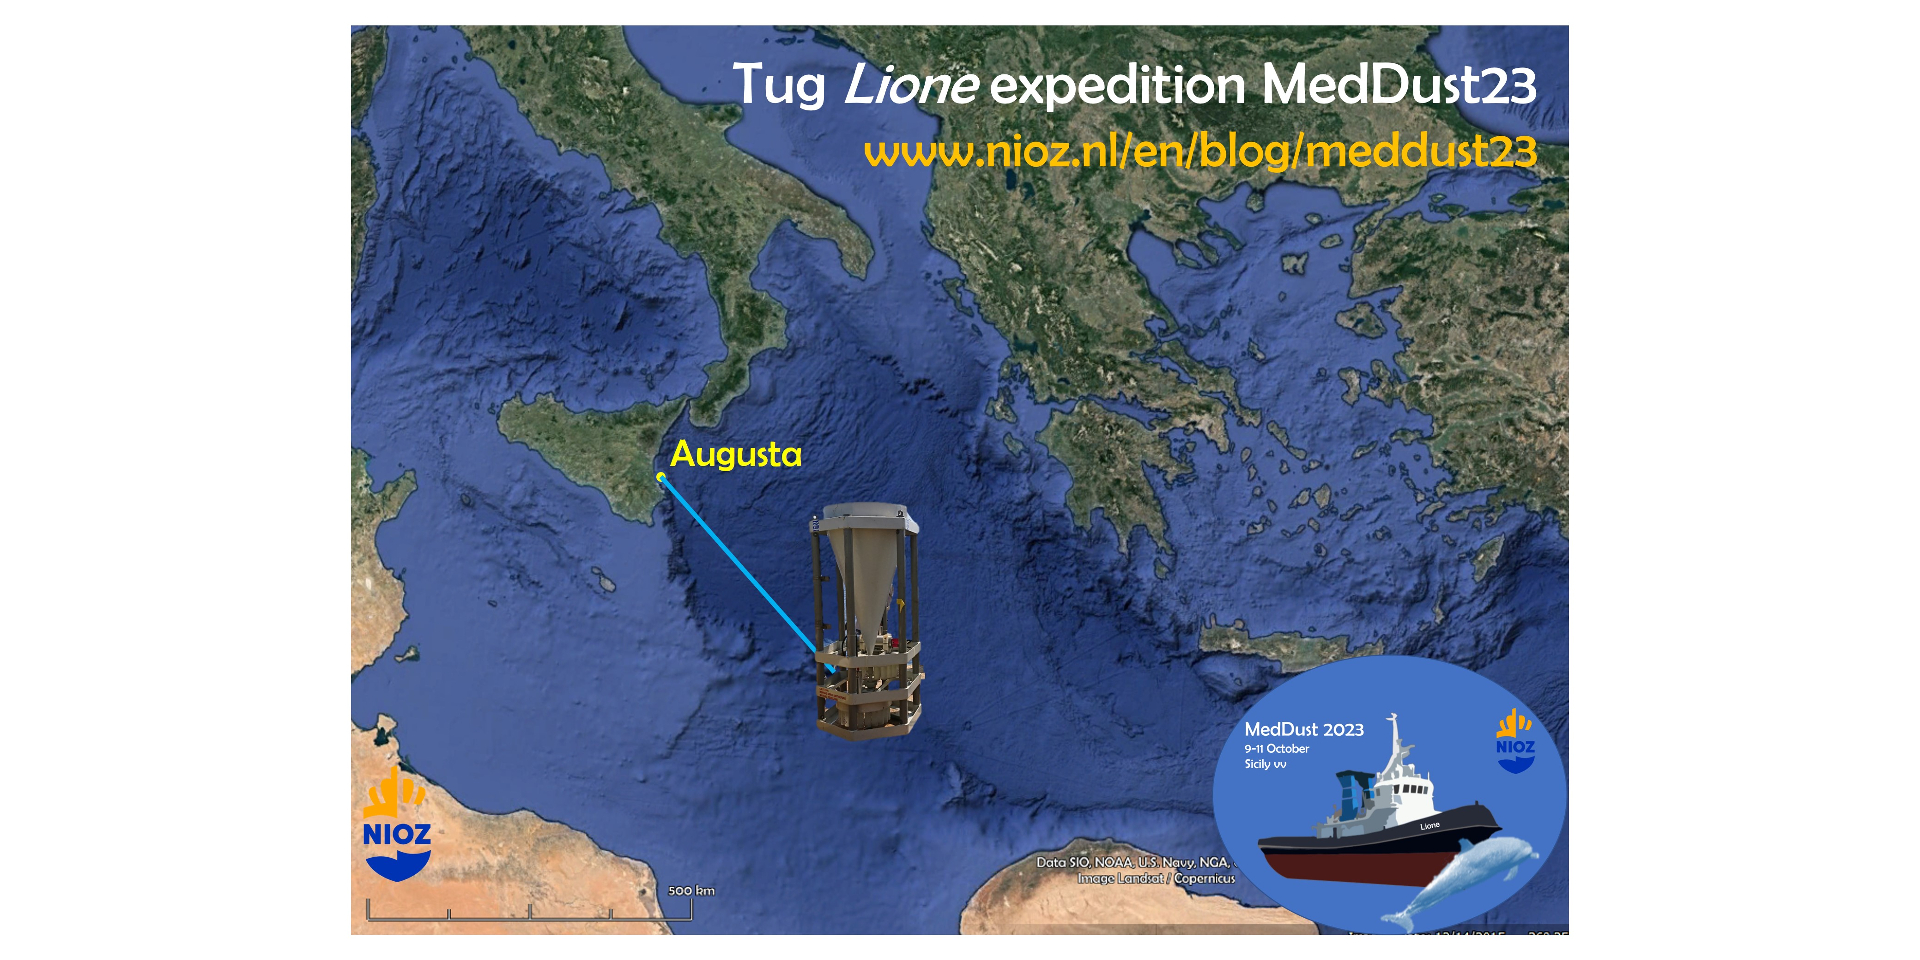 Cruise track of expedition MedDust23